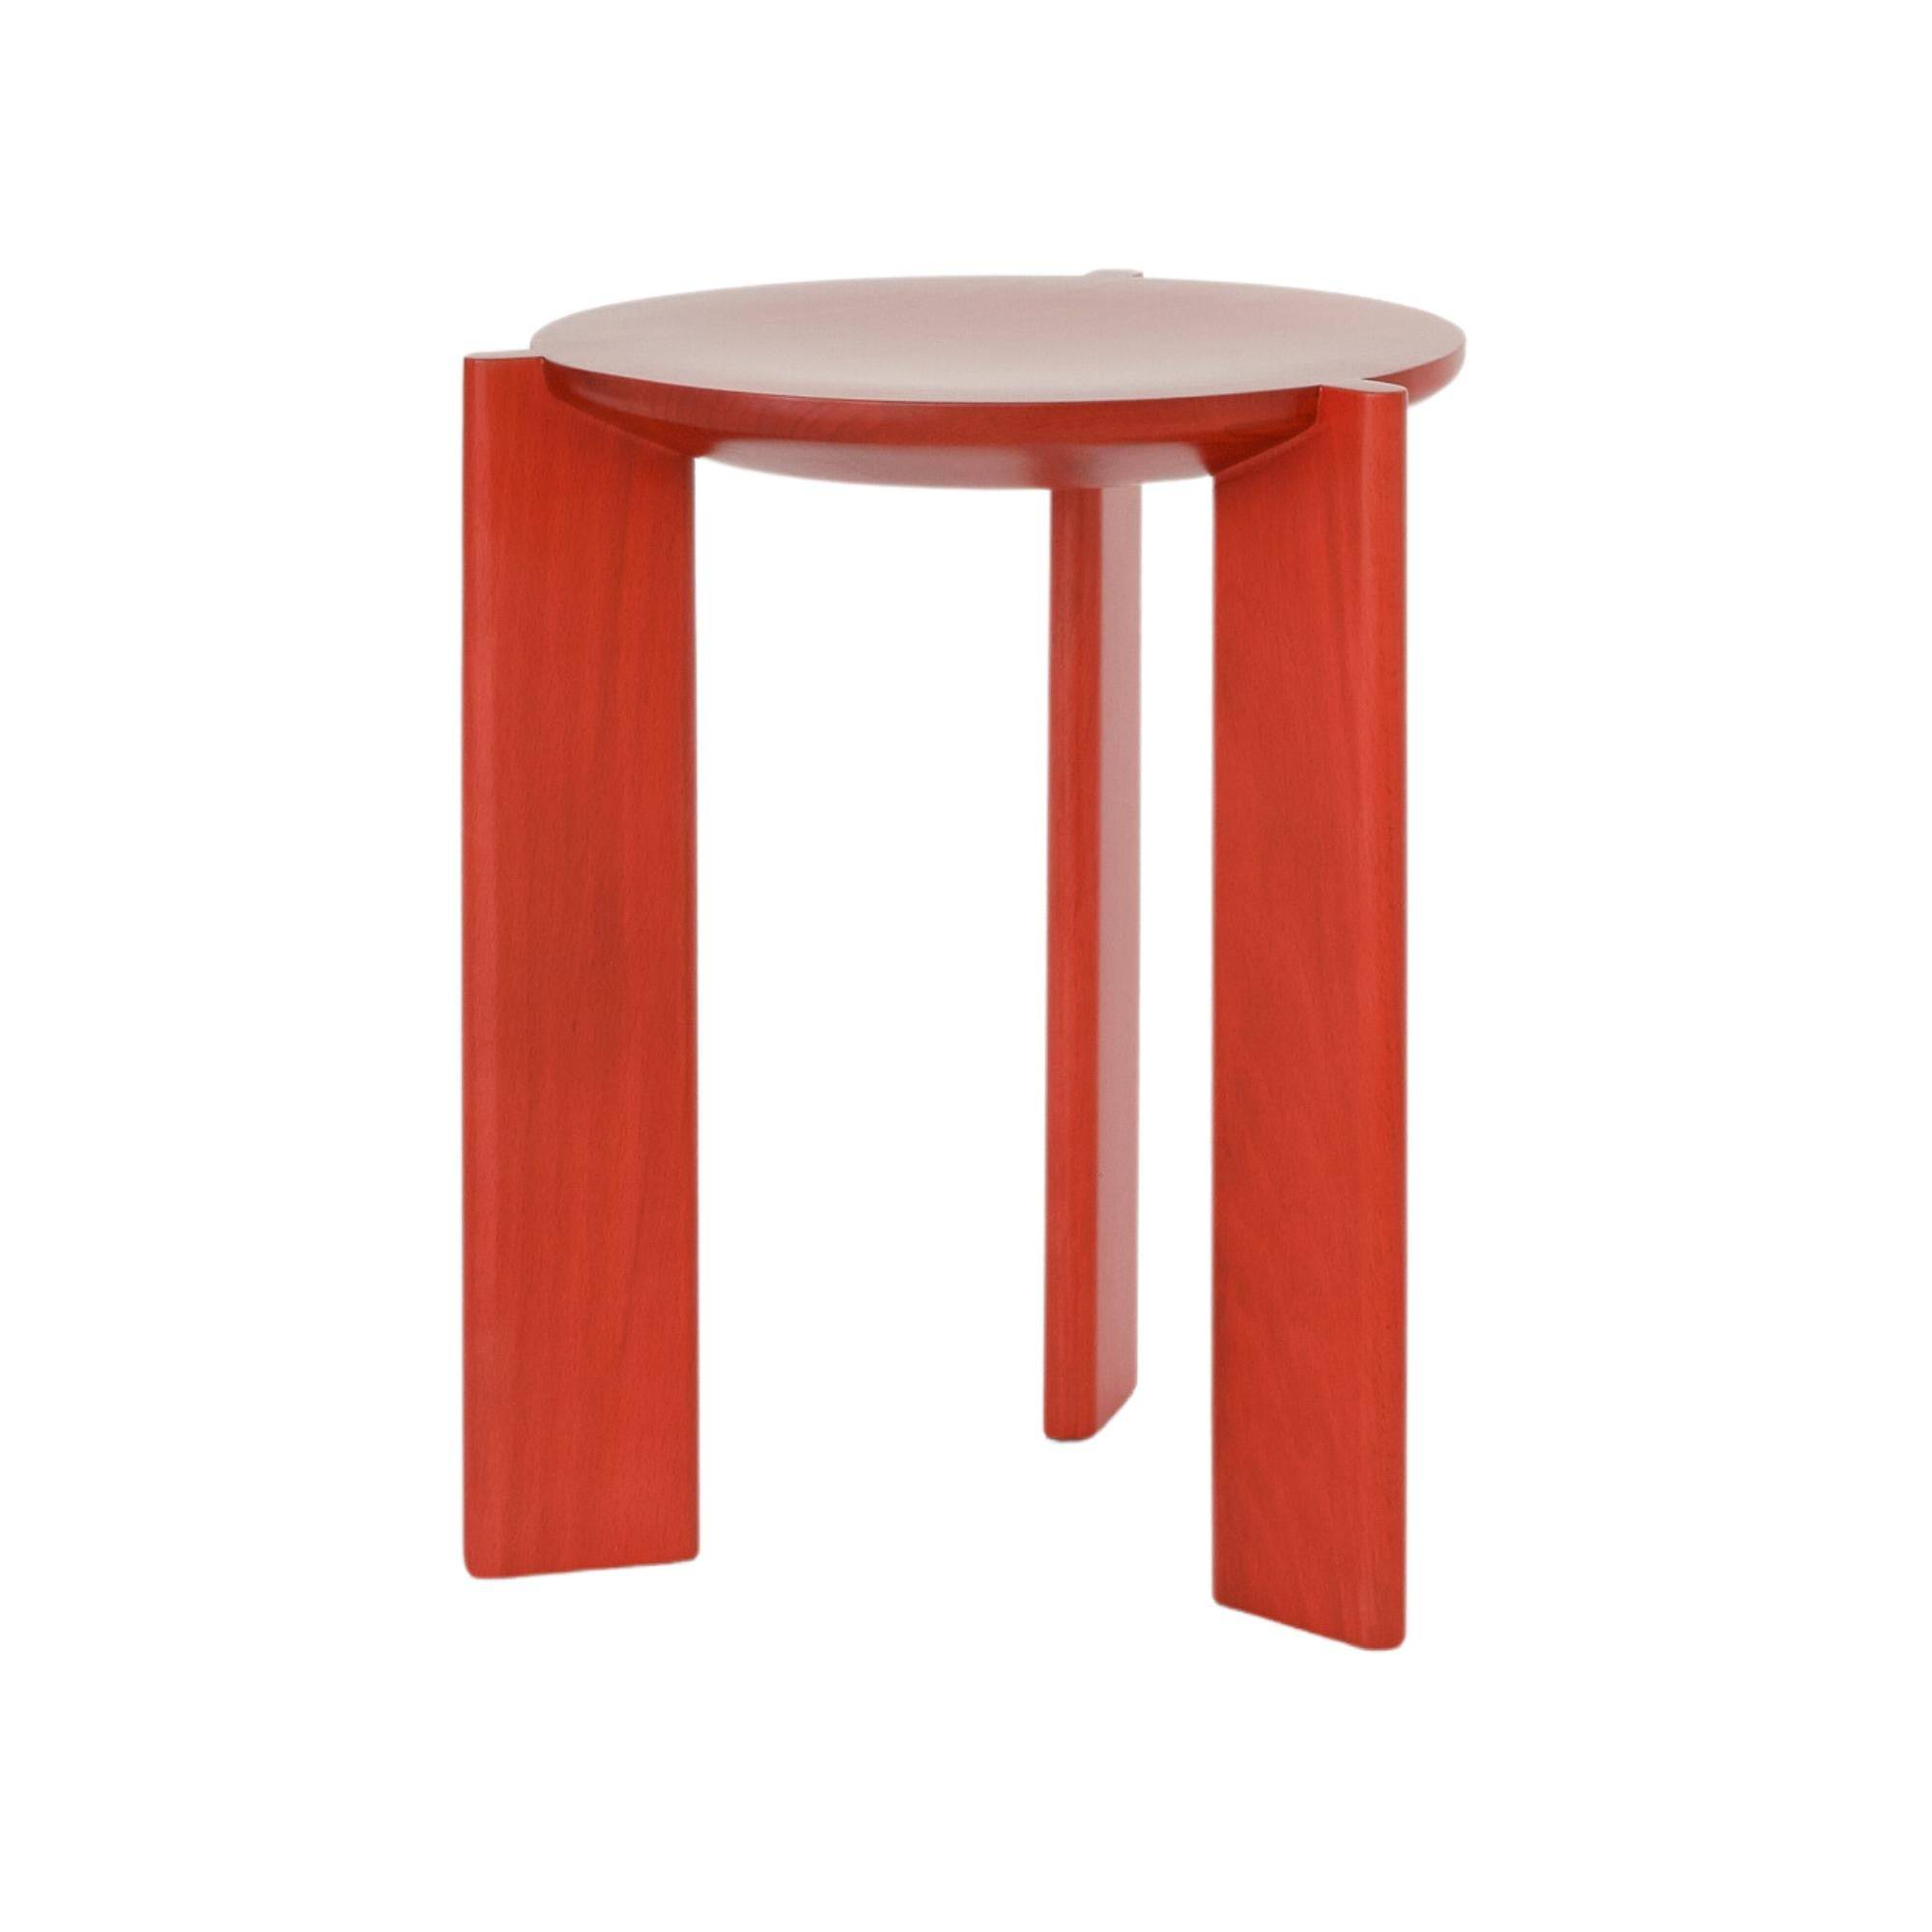 Taptap Stool - THAT COOL LIVING